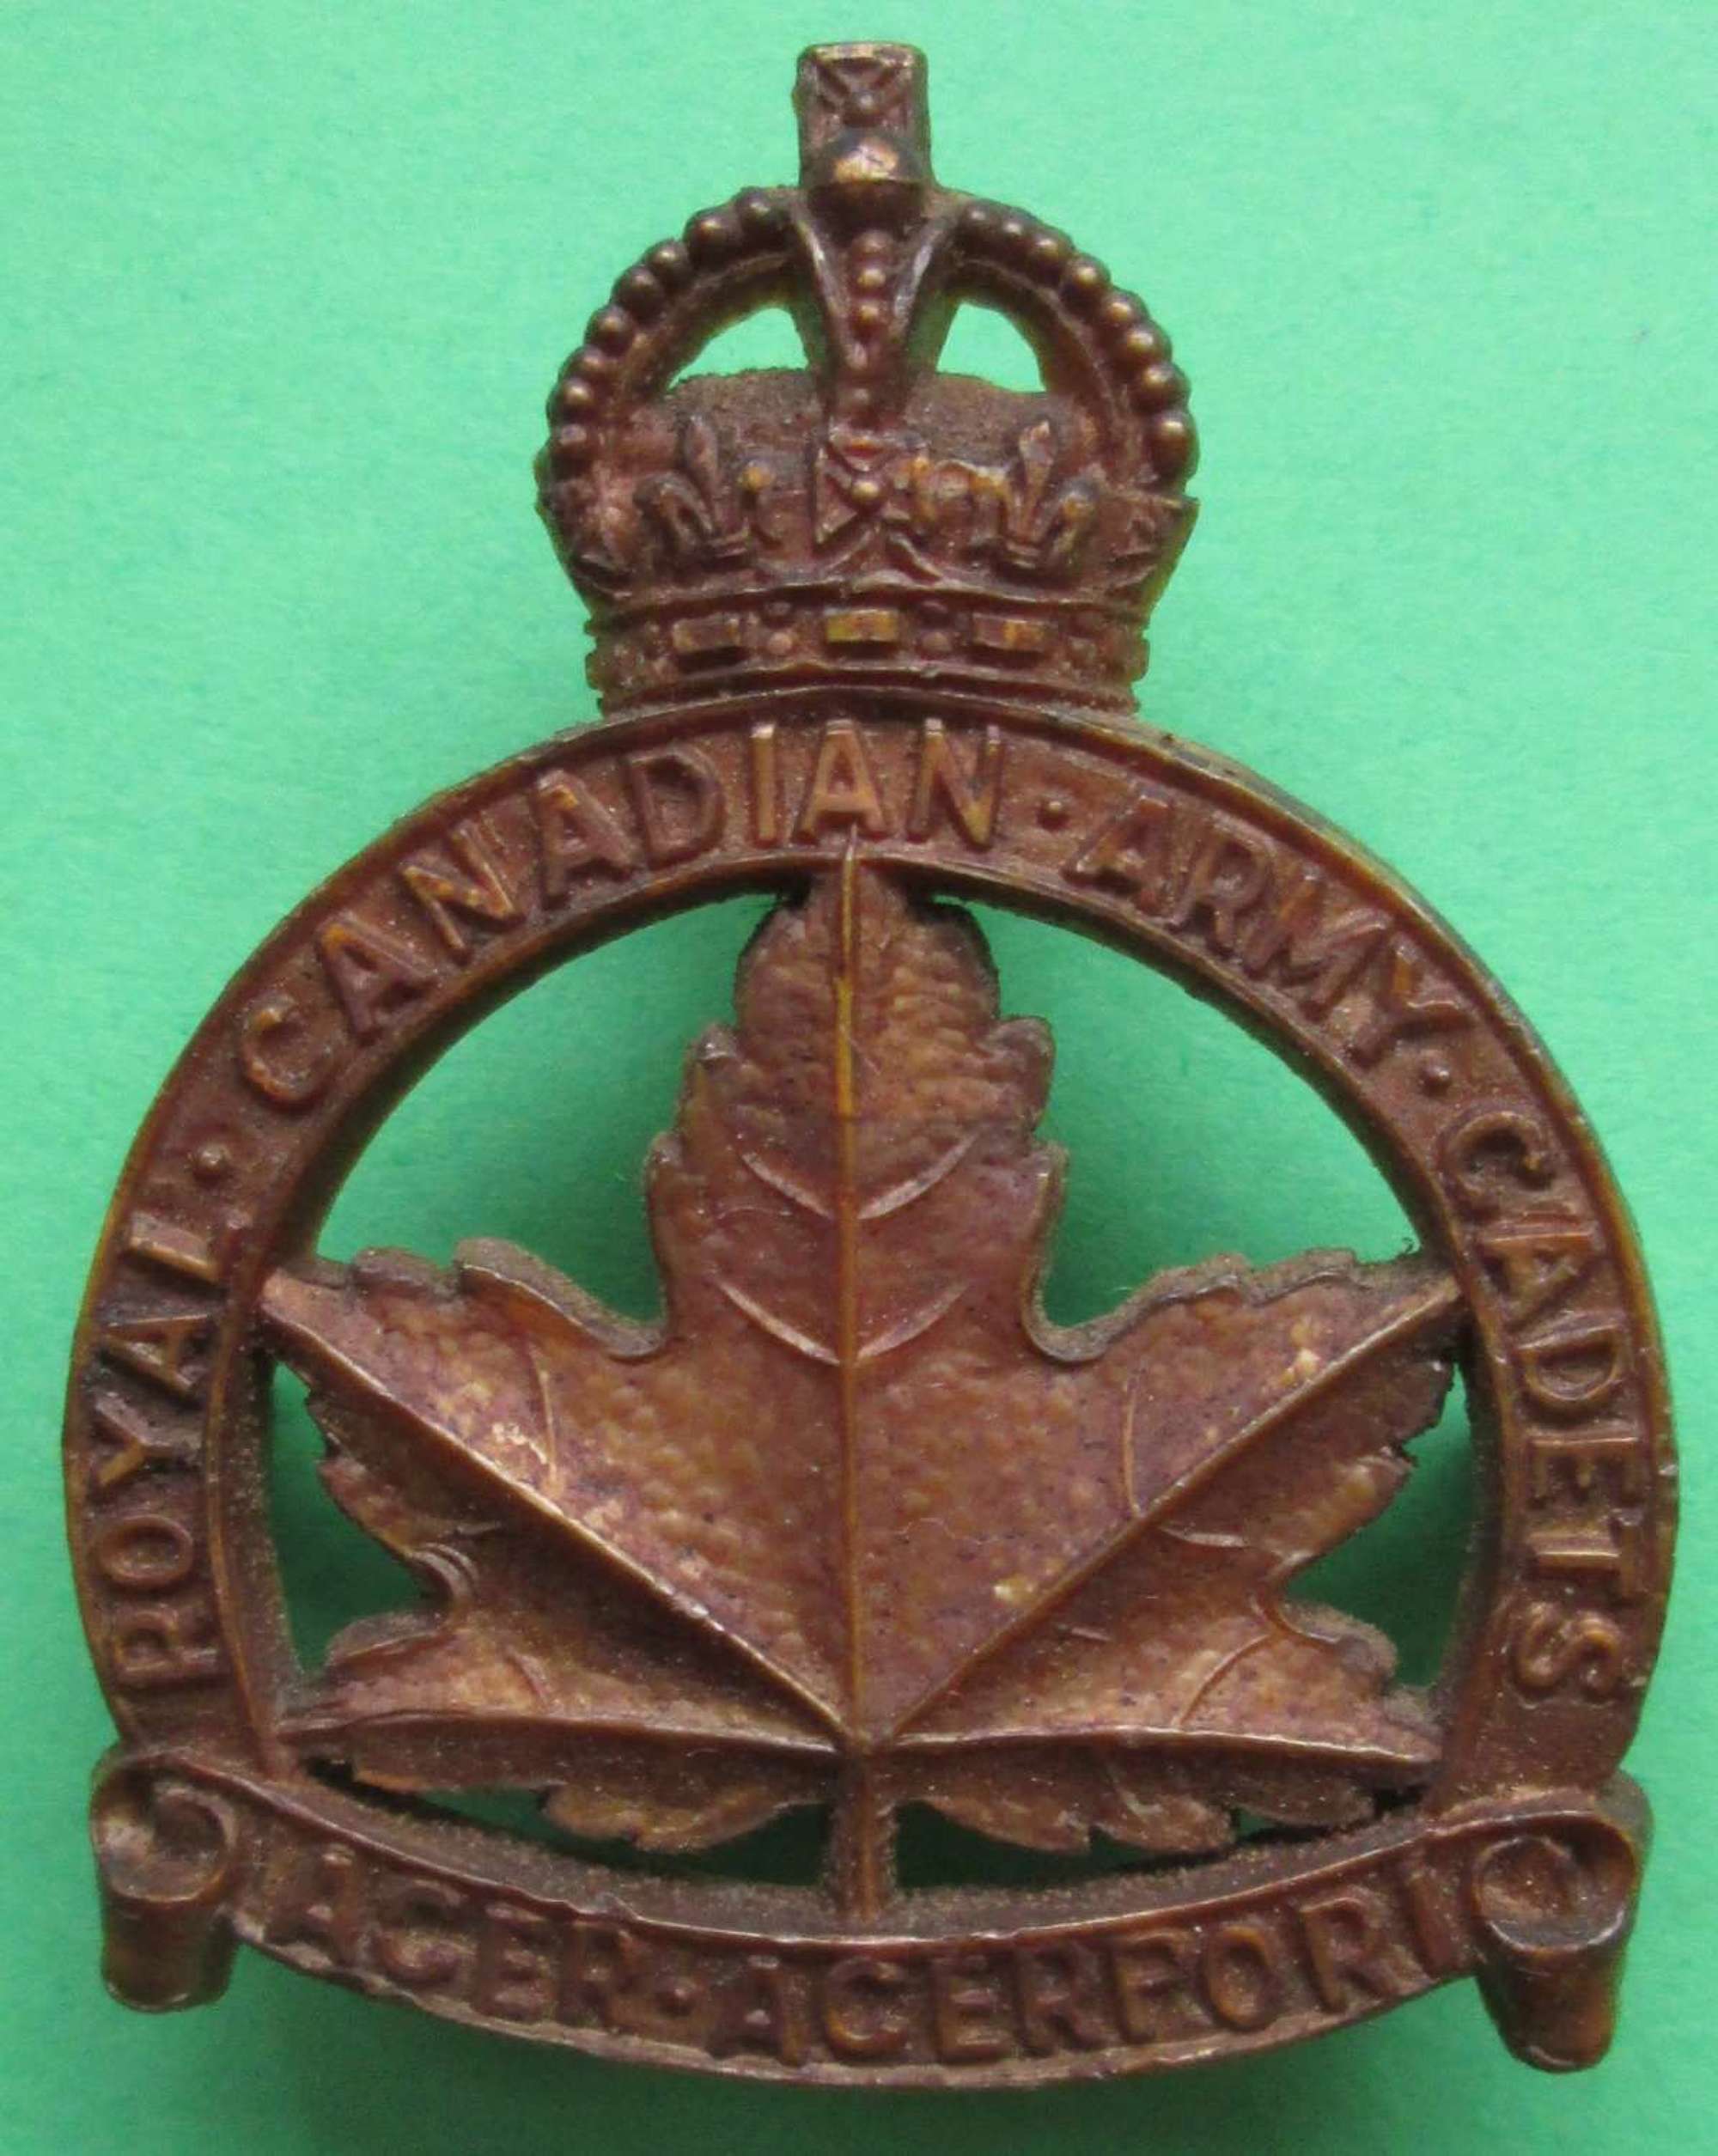 A CANADIAN PLASTIC ARMY CADET CORPS WWII PERIOD CAP BADGE